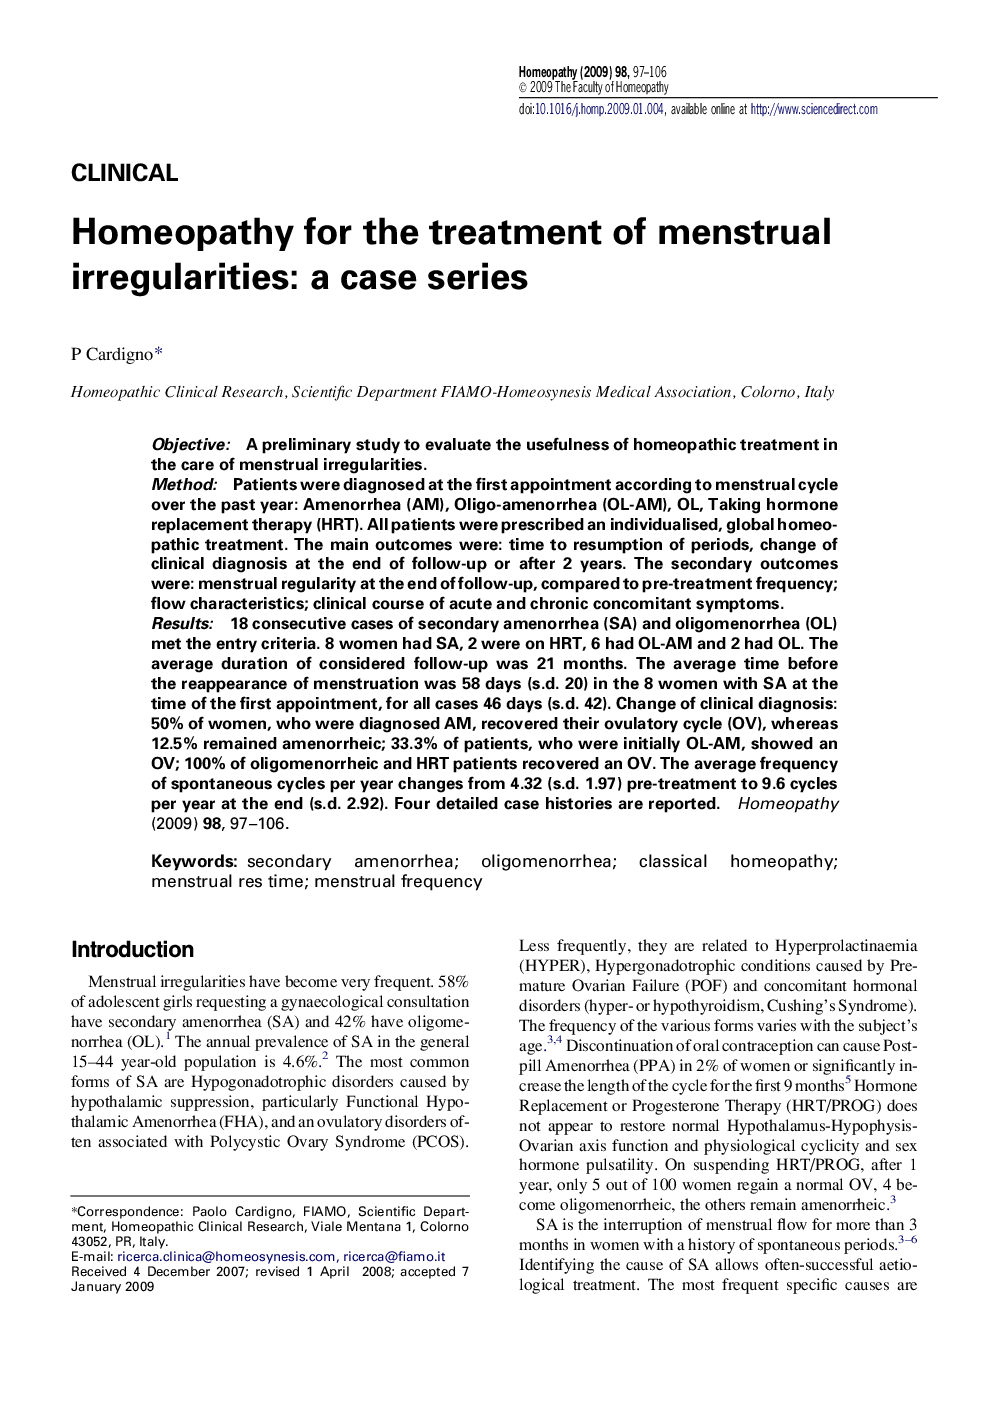 Homeopathy for the treatment of menstrual irregularities: a case series